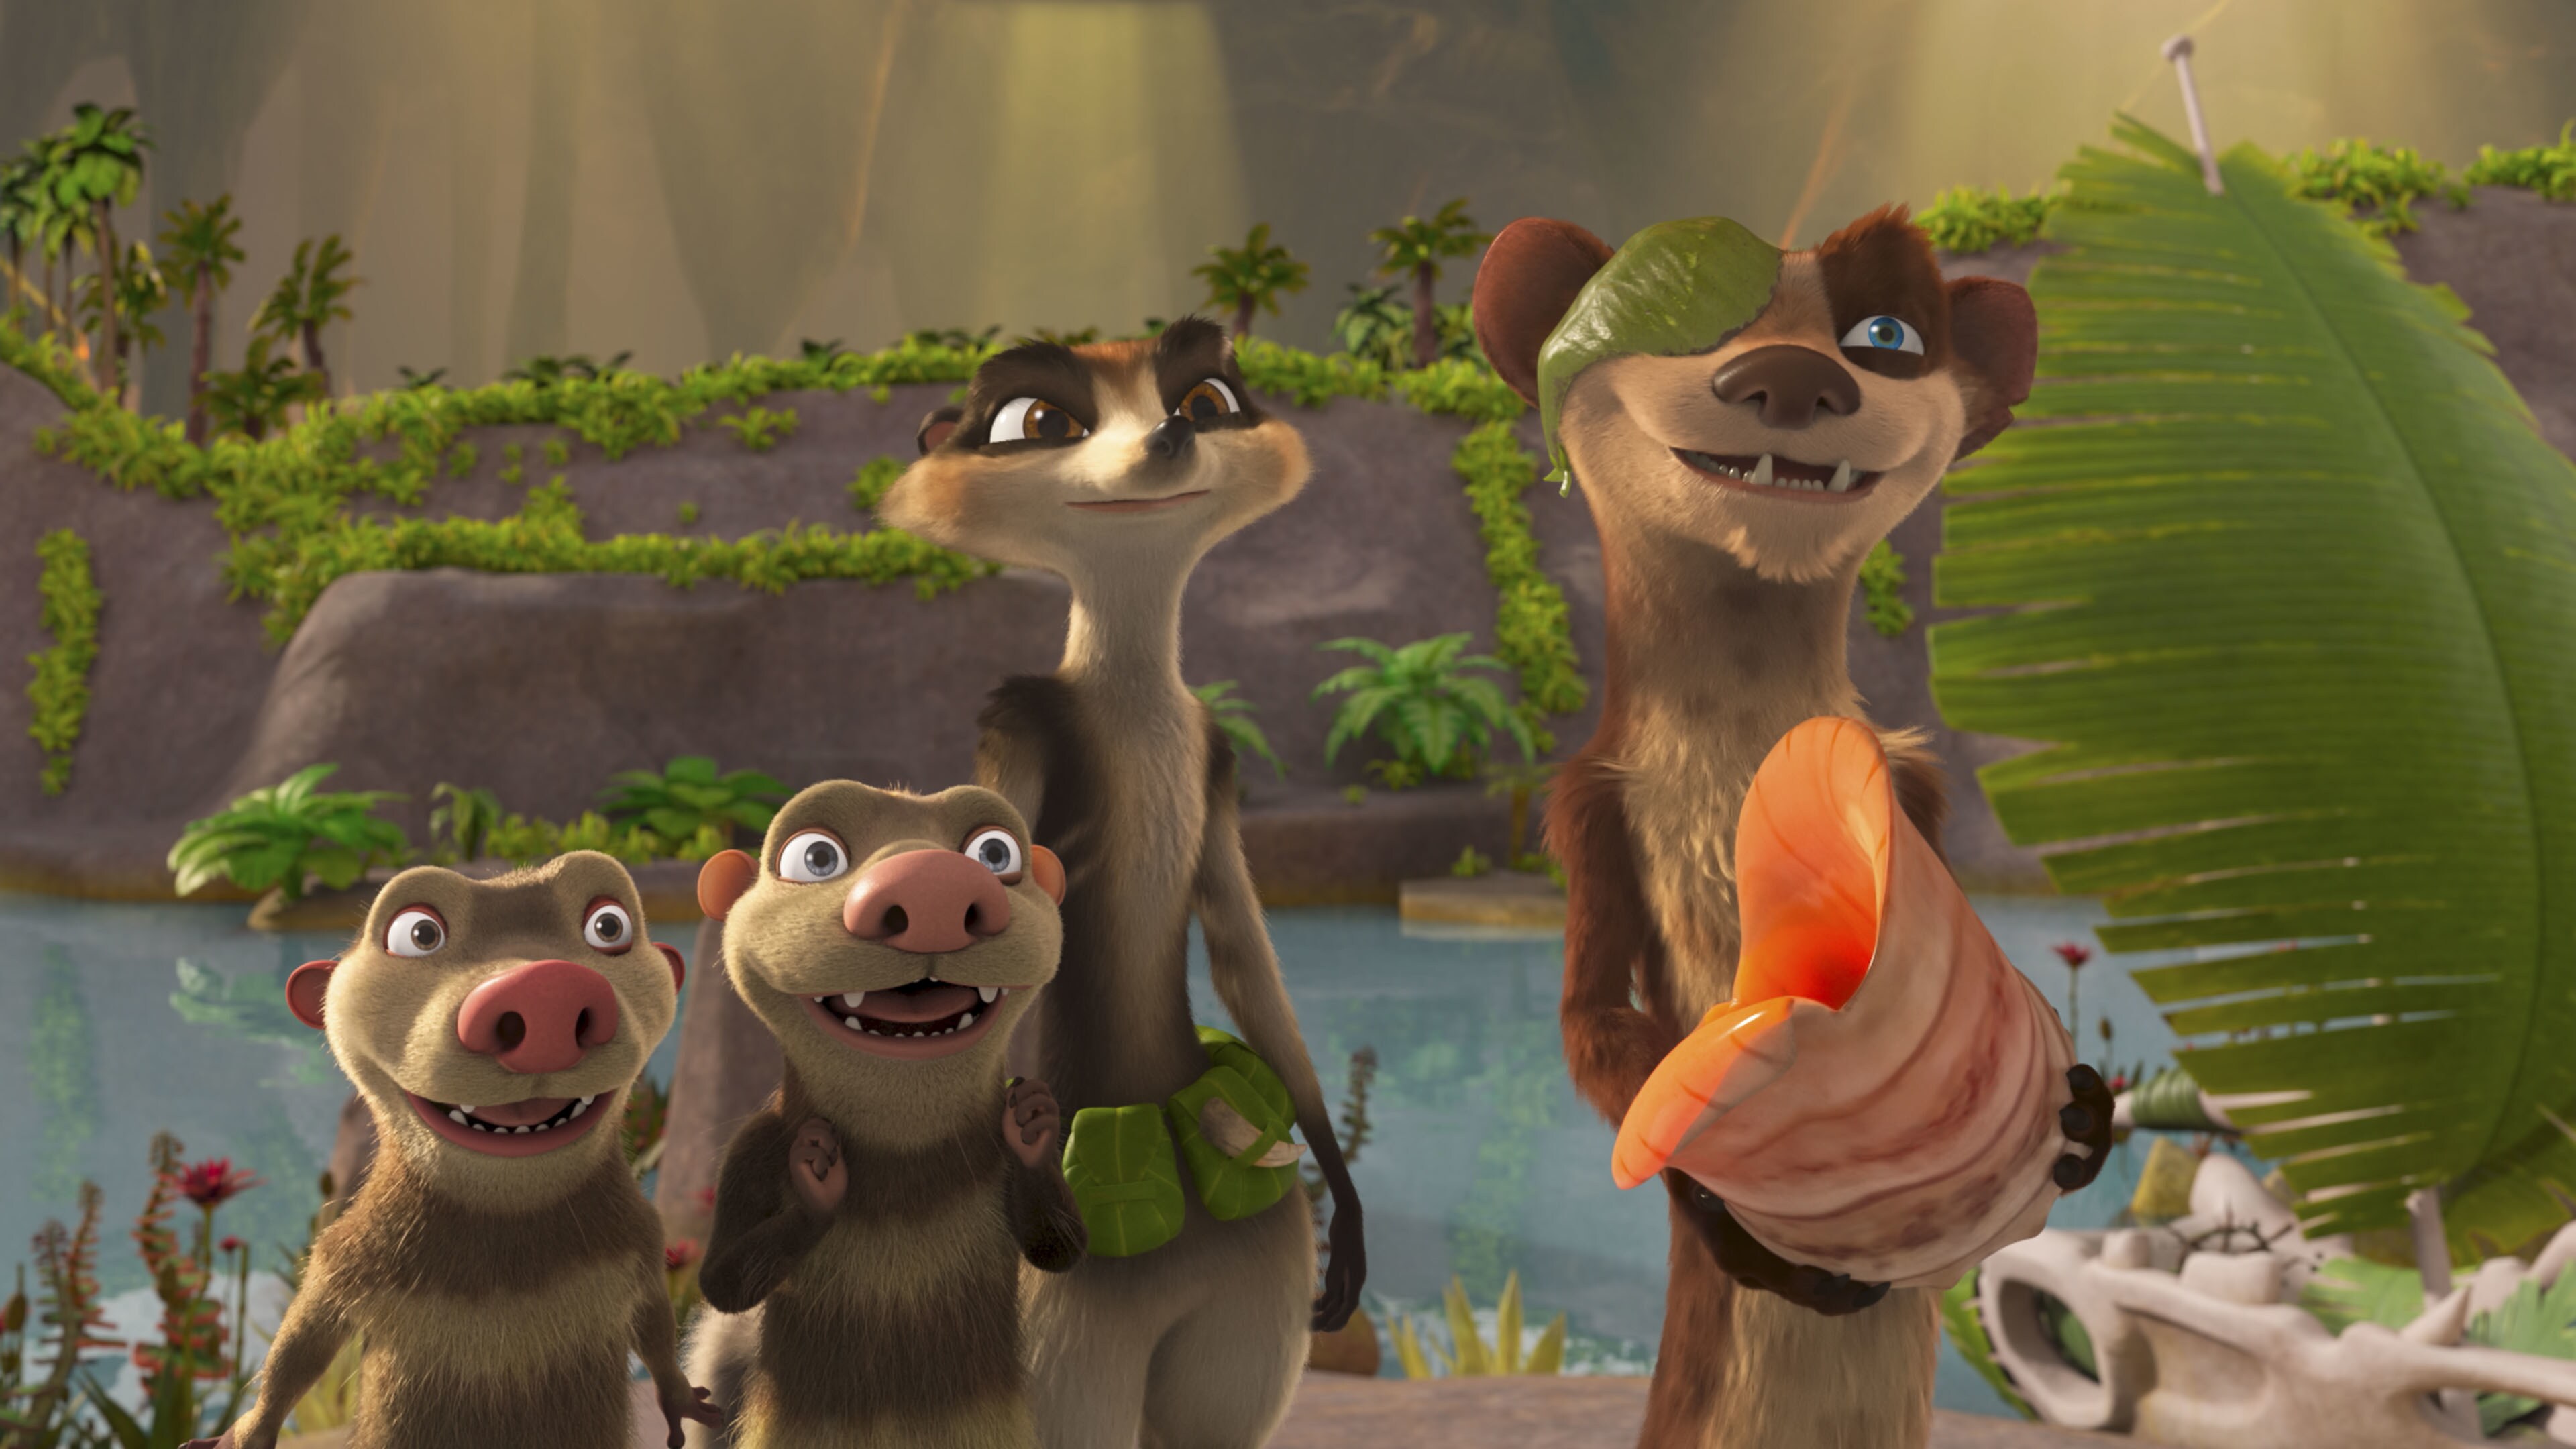 Crash (voiced by Seann William Scott), Eddie (voiced by Josh Peck), Zee (voiced by Justina Machado), and Buck (voiced by Simon Pegg) in THE ICE AGE ADVENTURES OF BUCK WILD, exclusively on Disney+. Photo courtesy of Disney Enterprises, Inc. © 2022 Disney Enterprises, Inc. All Rights Reserved. 